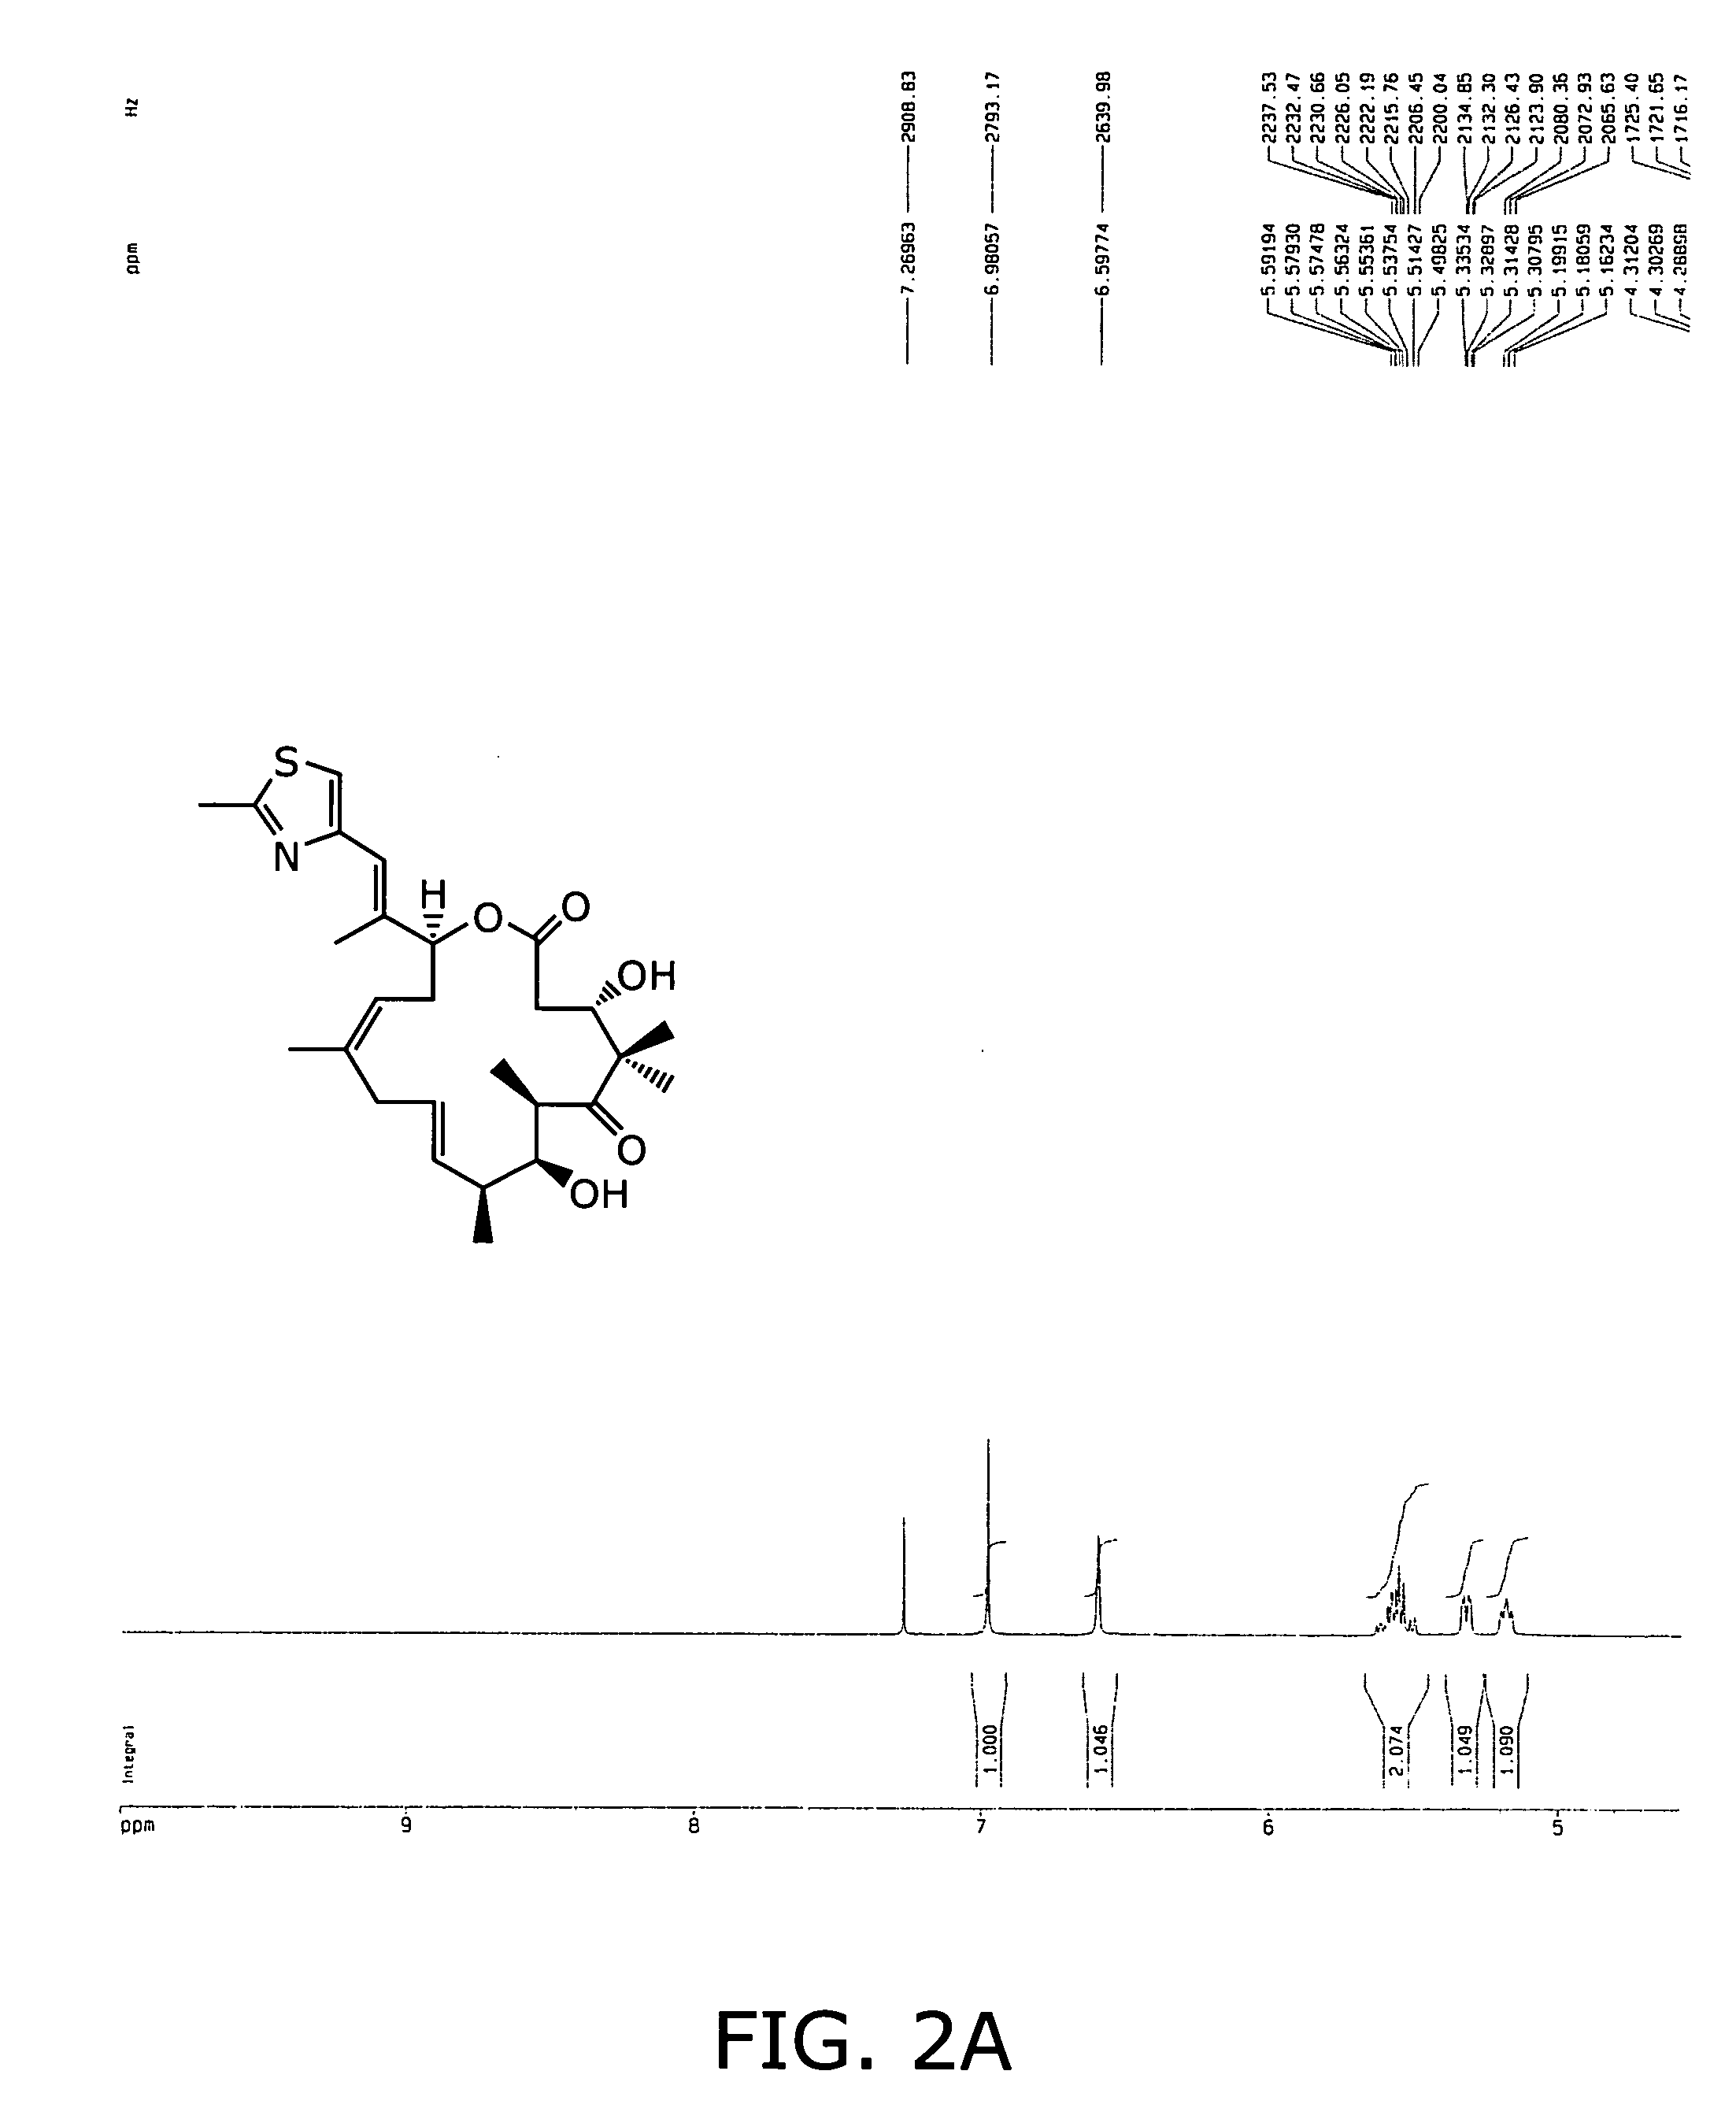 Synthesis of epothilones, intermediates thereto and analogues thereof